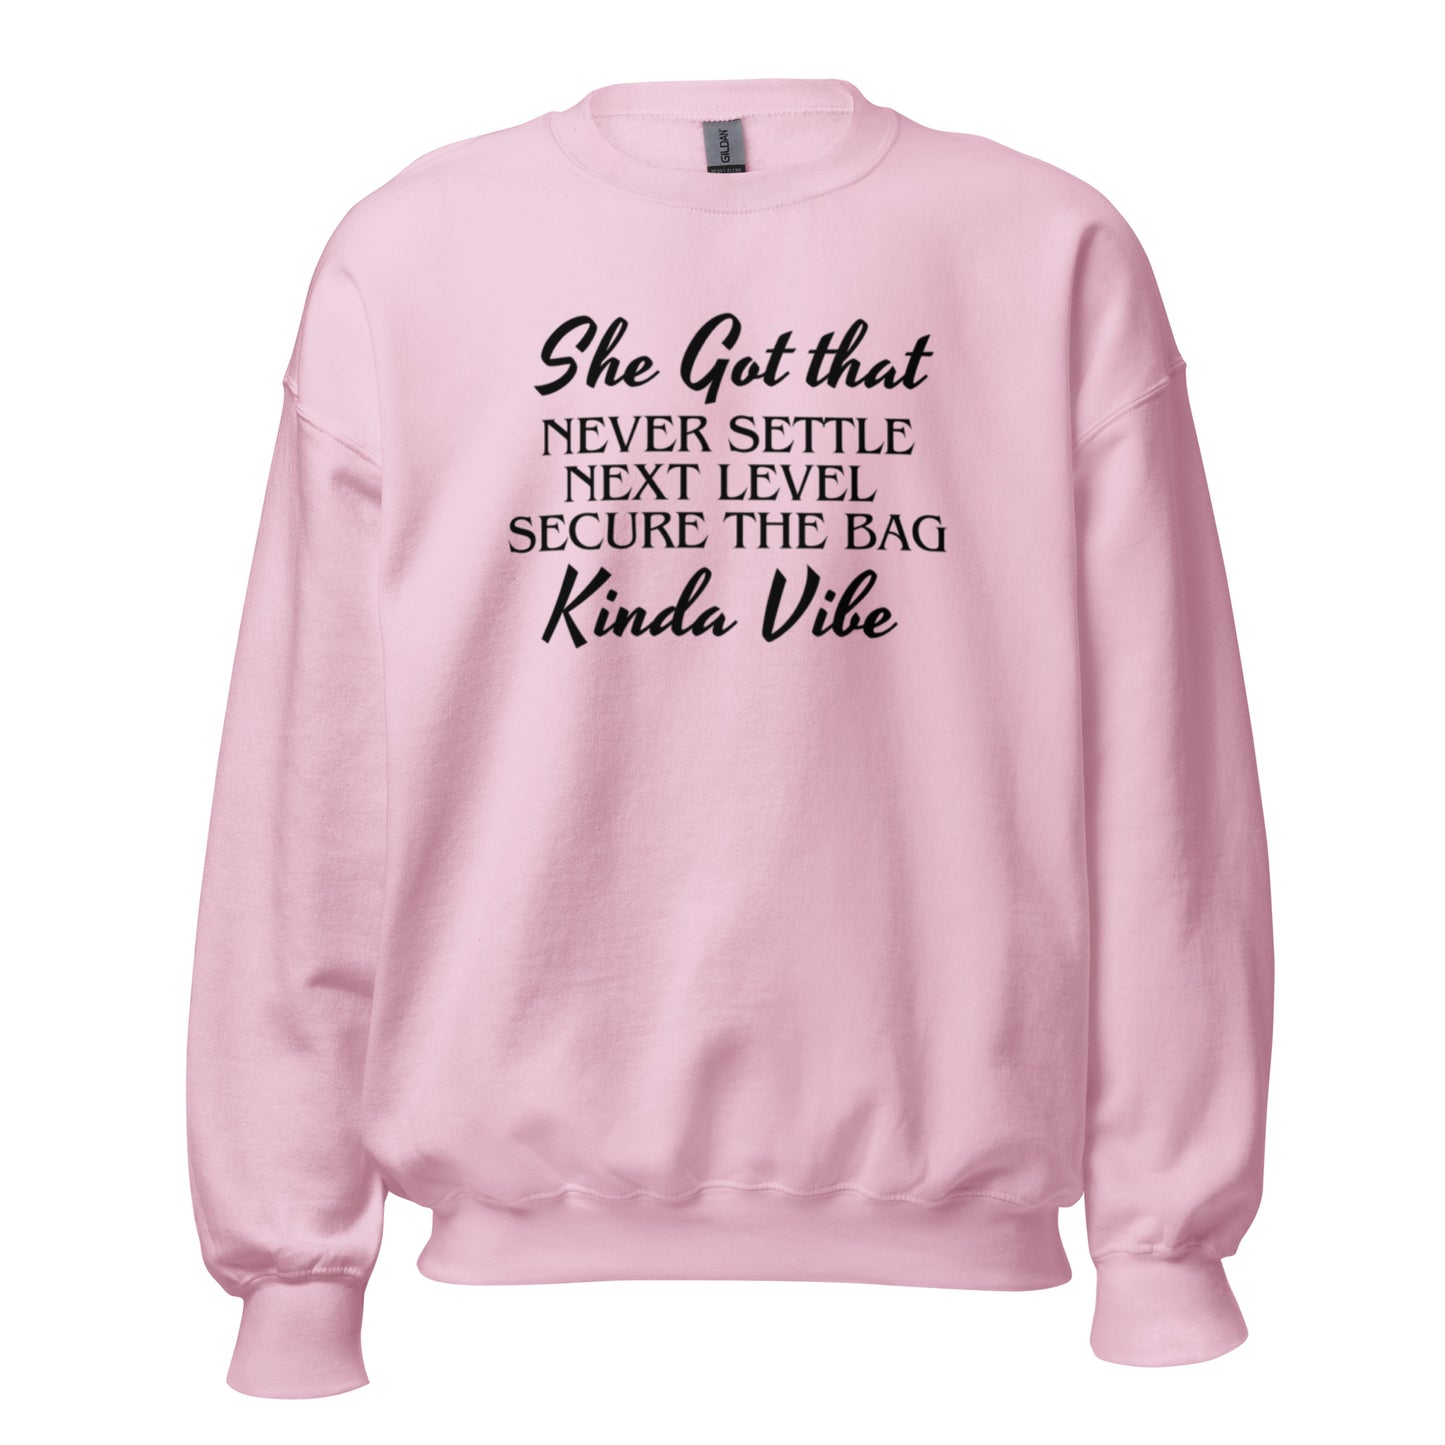 She's Got That Next Level Vibe Unisex Sweatshirt (For a Slim Fit Order a Size Down)